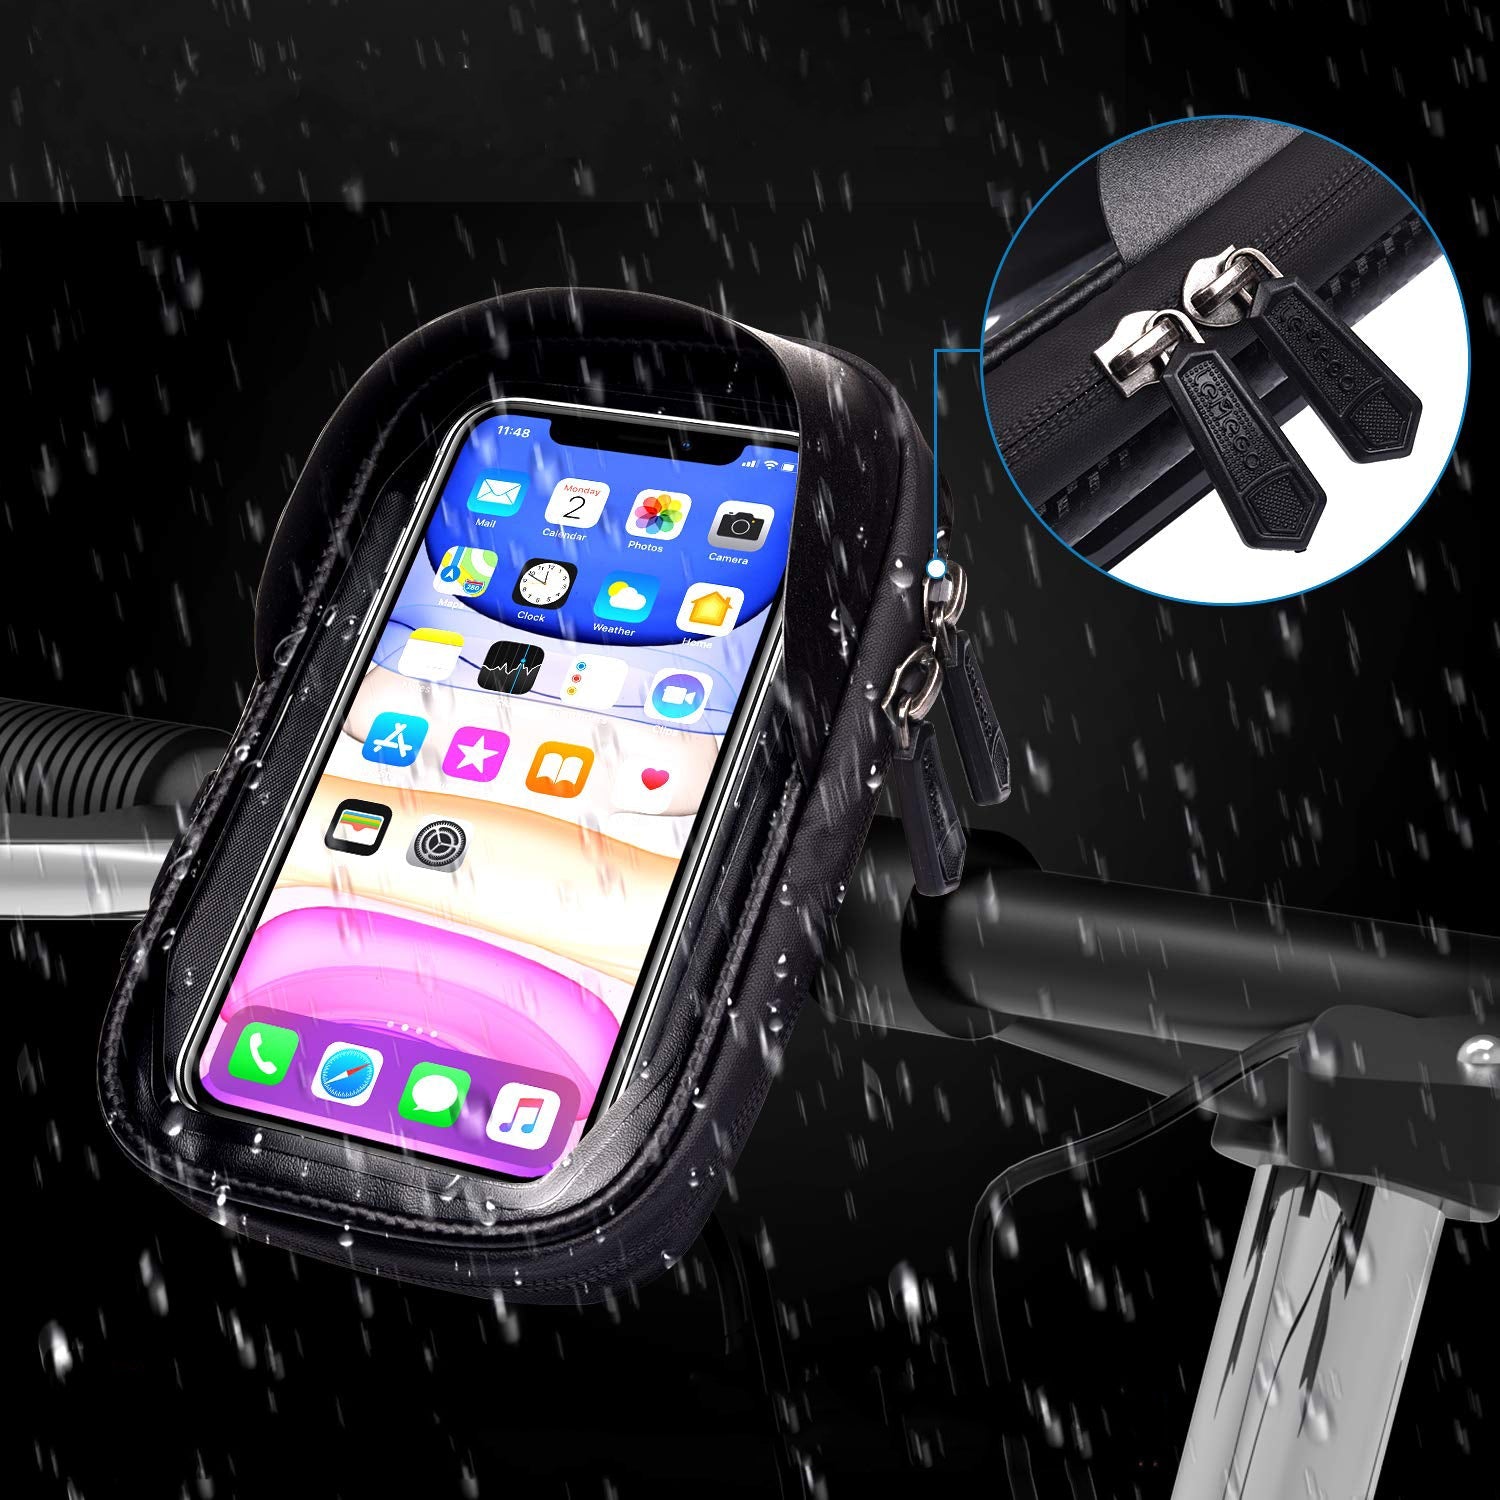 Bicycle Waterproof Touch Screen Mobile Phone Stand